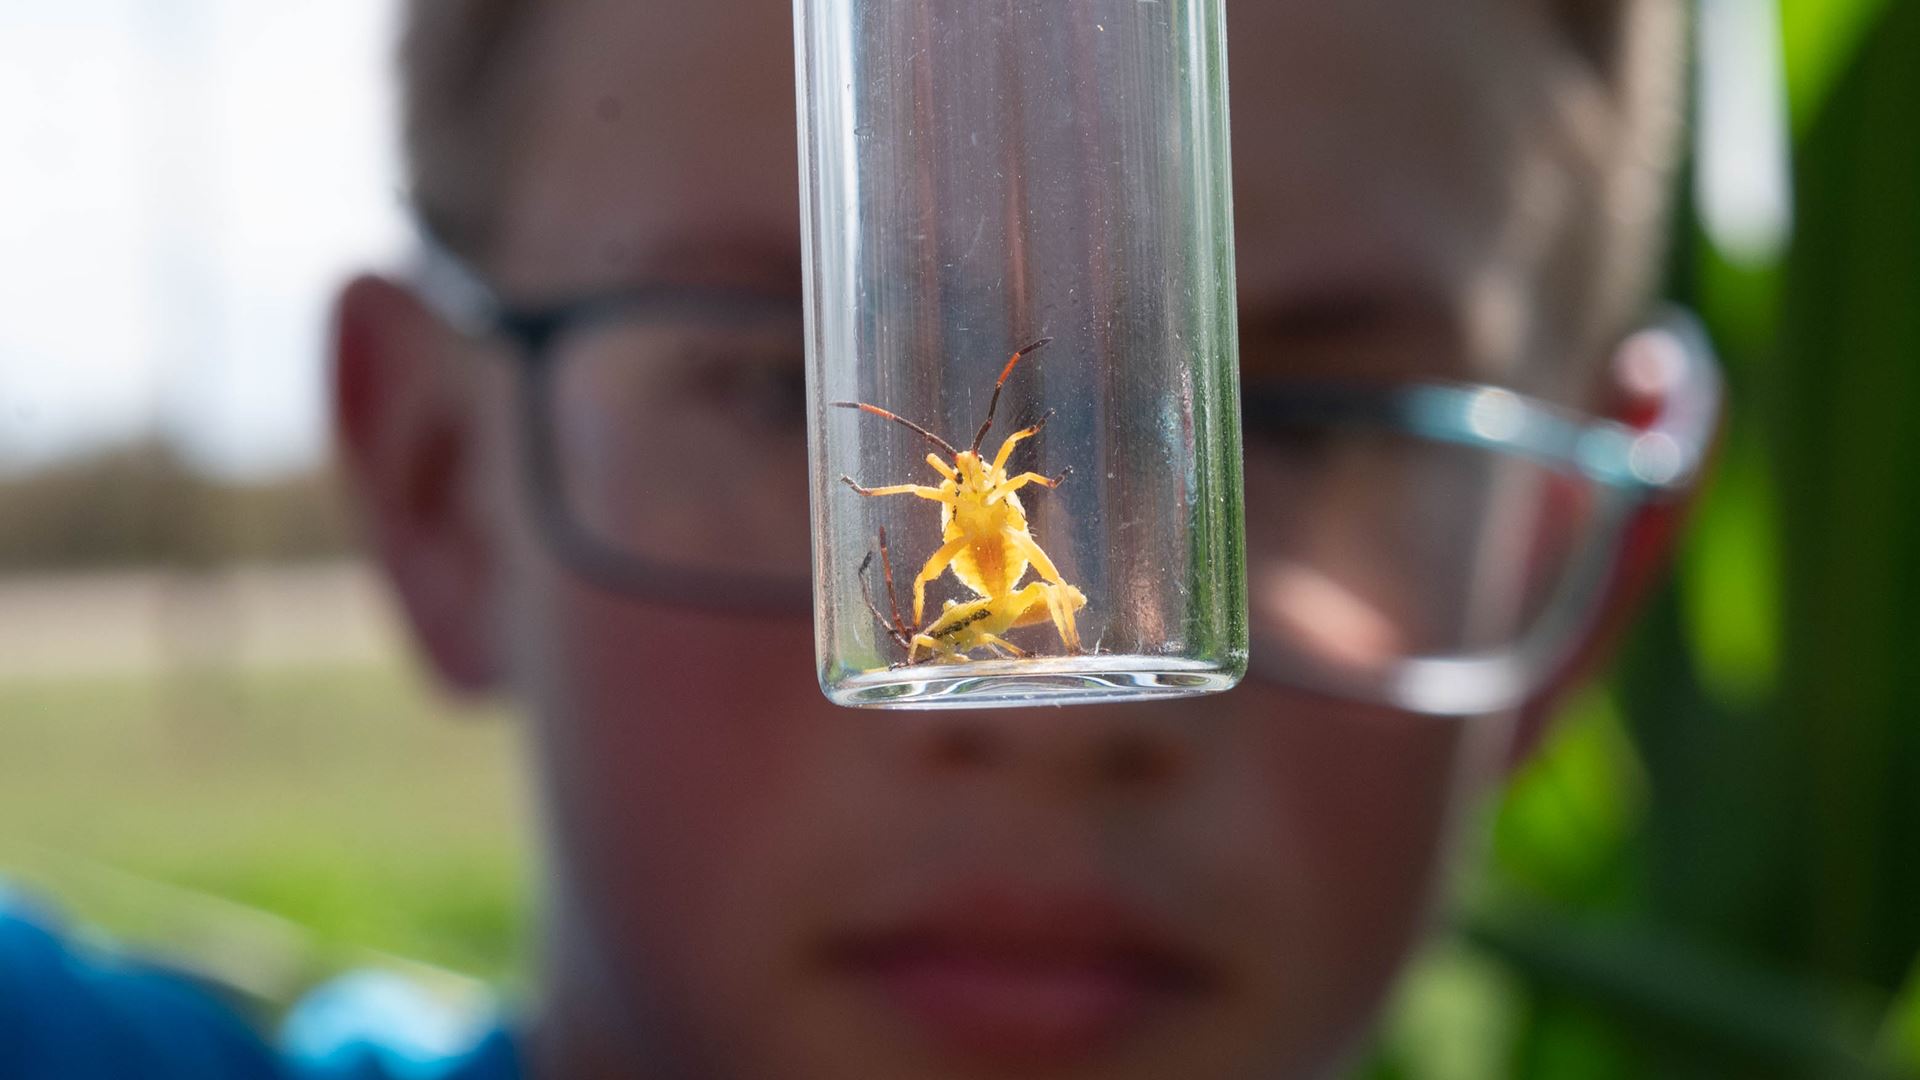 A boy looking at a bug in a glass vial